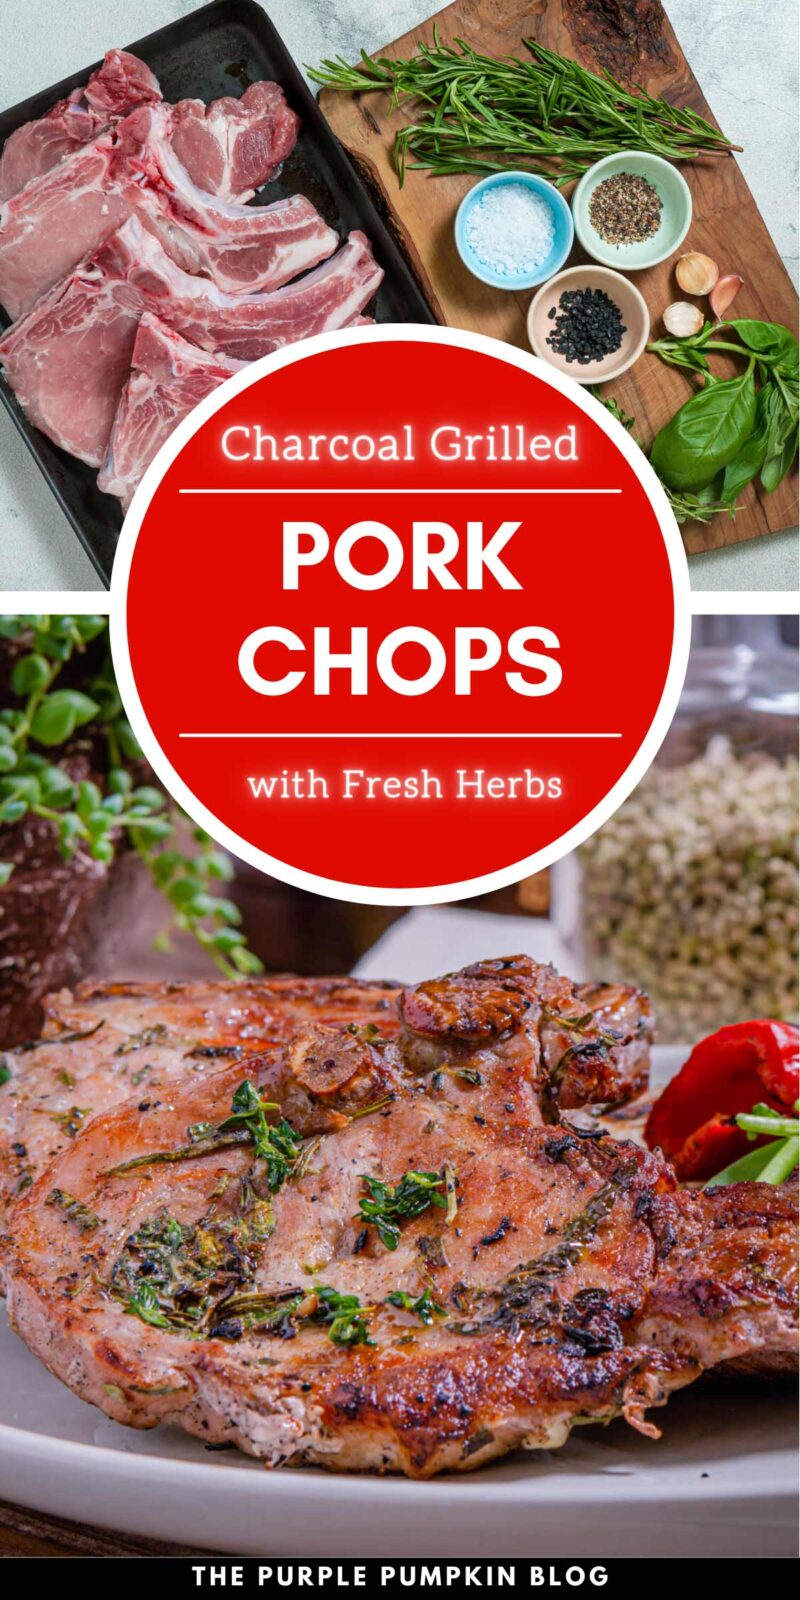 Charcoal Grilled Pork Chops with Fresh Herbs